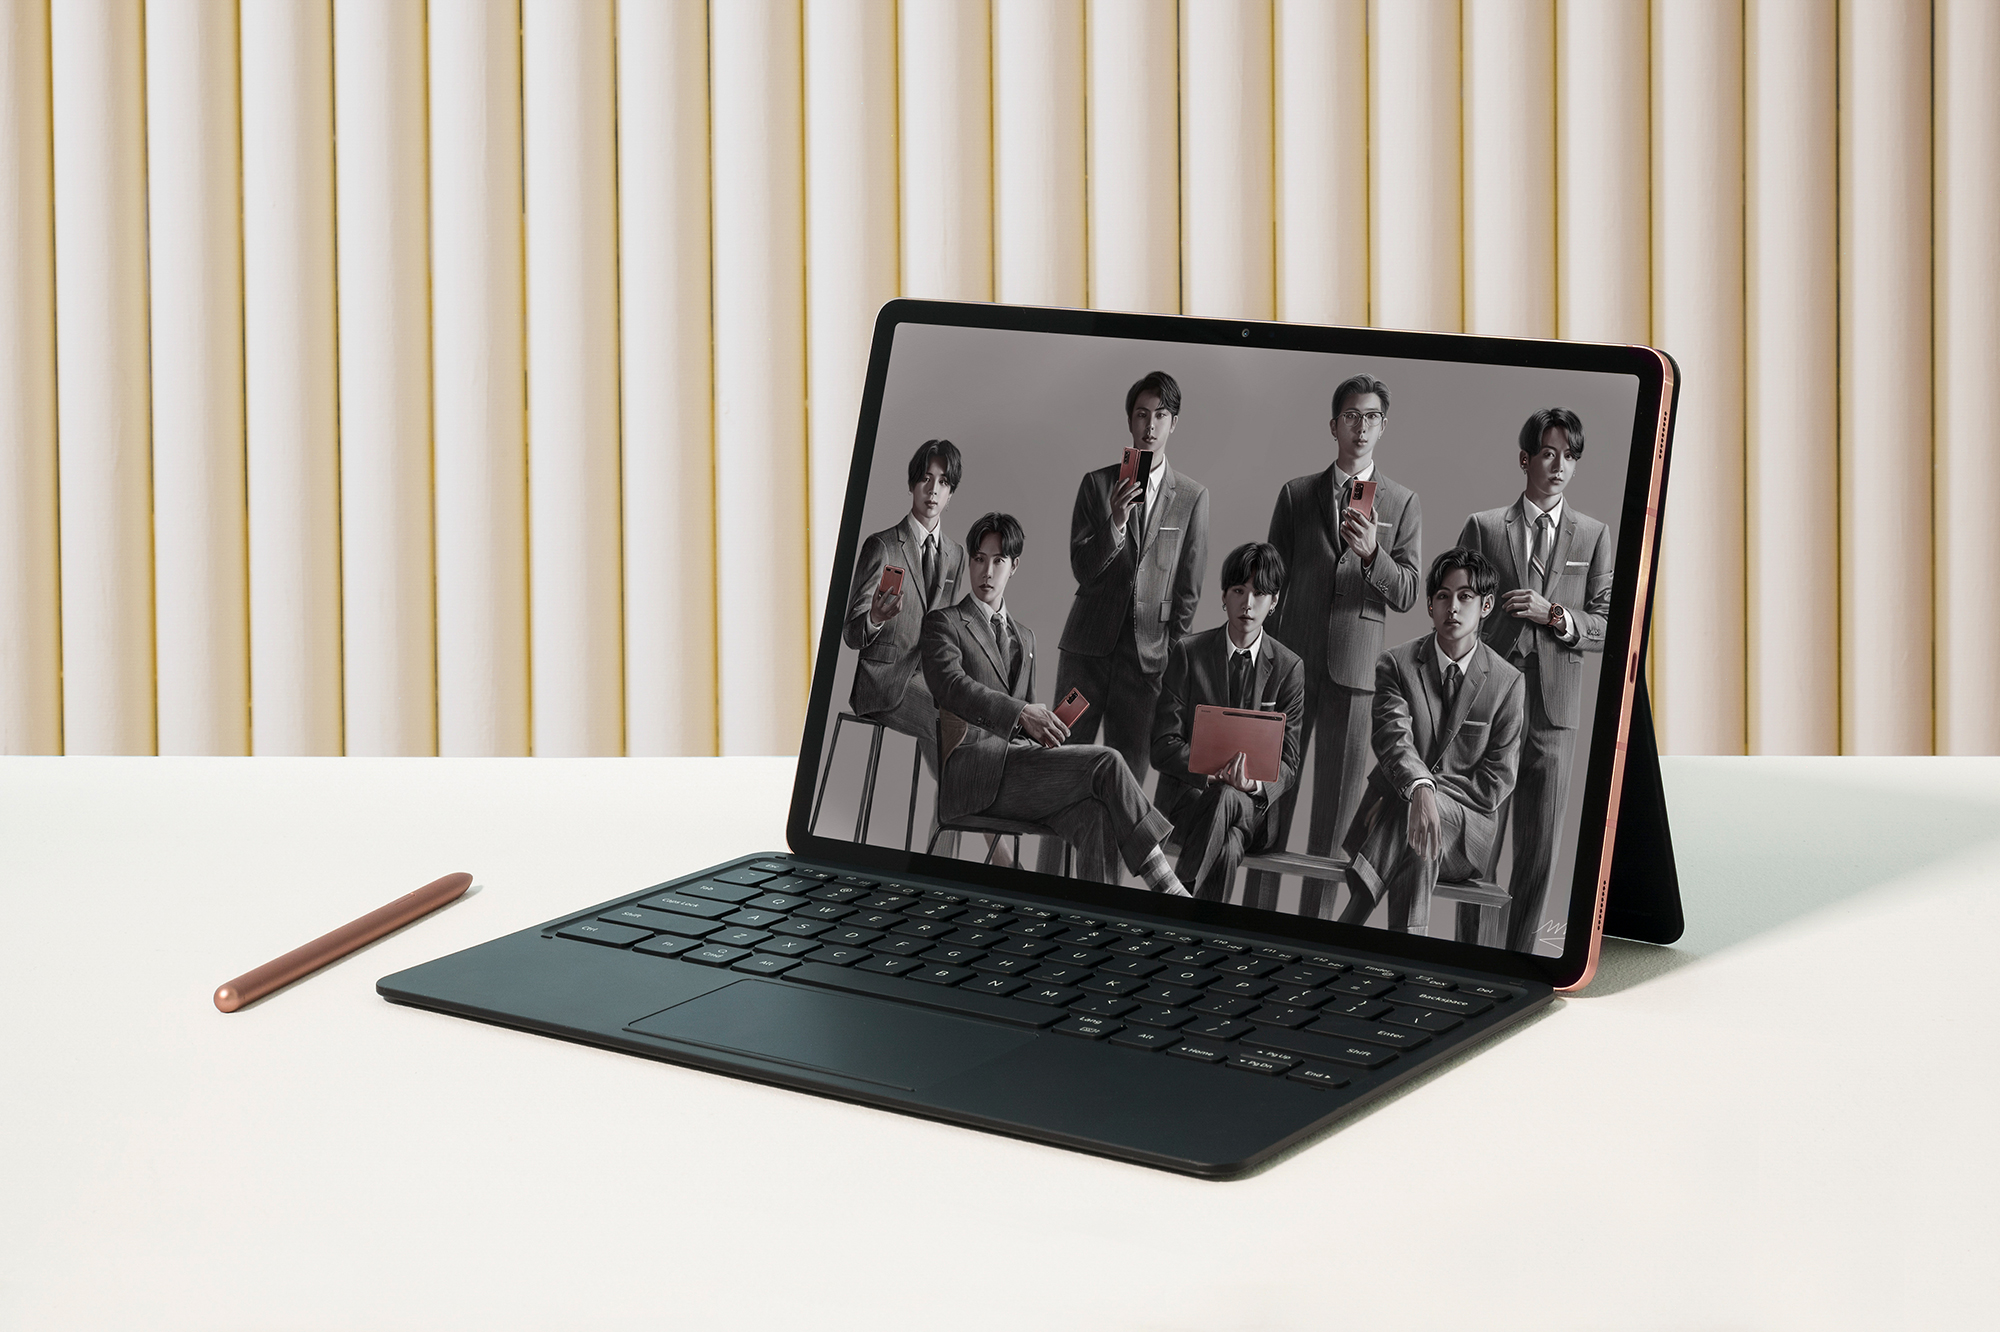 A Galaxy Tab S7+ with Book Cover Keyboard attached and S Pen beside it shows a digitally-drawn image of BTS with the latest Galaxy products.